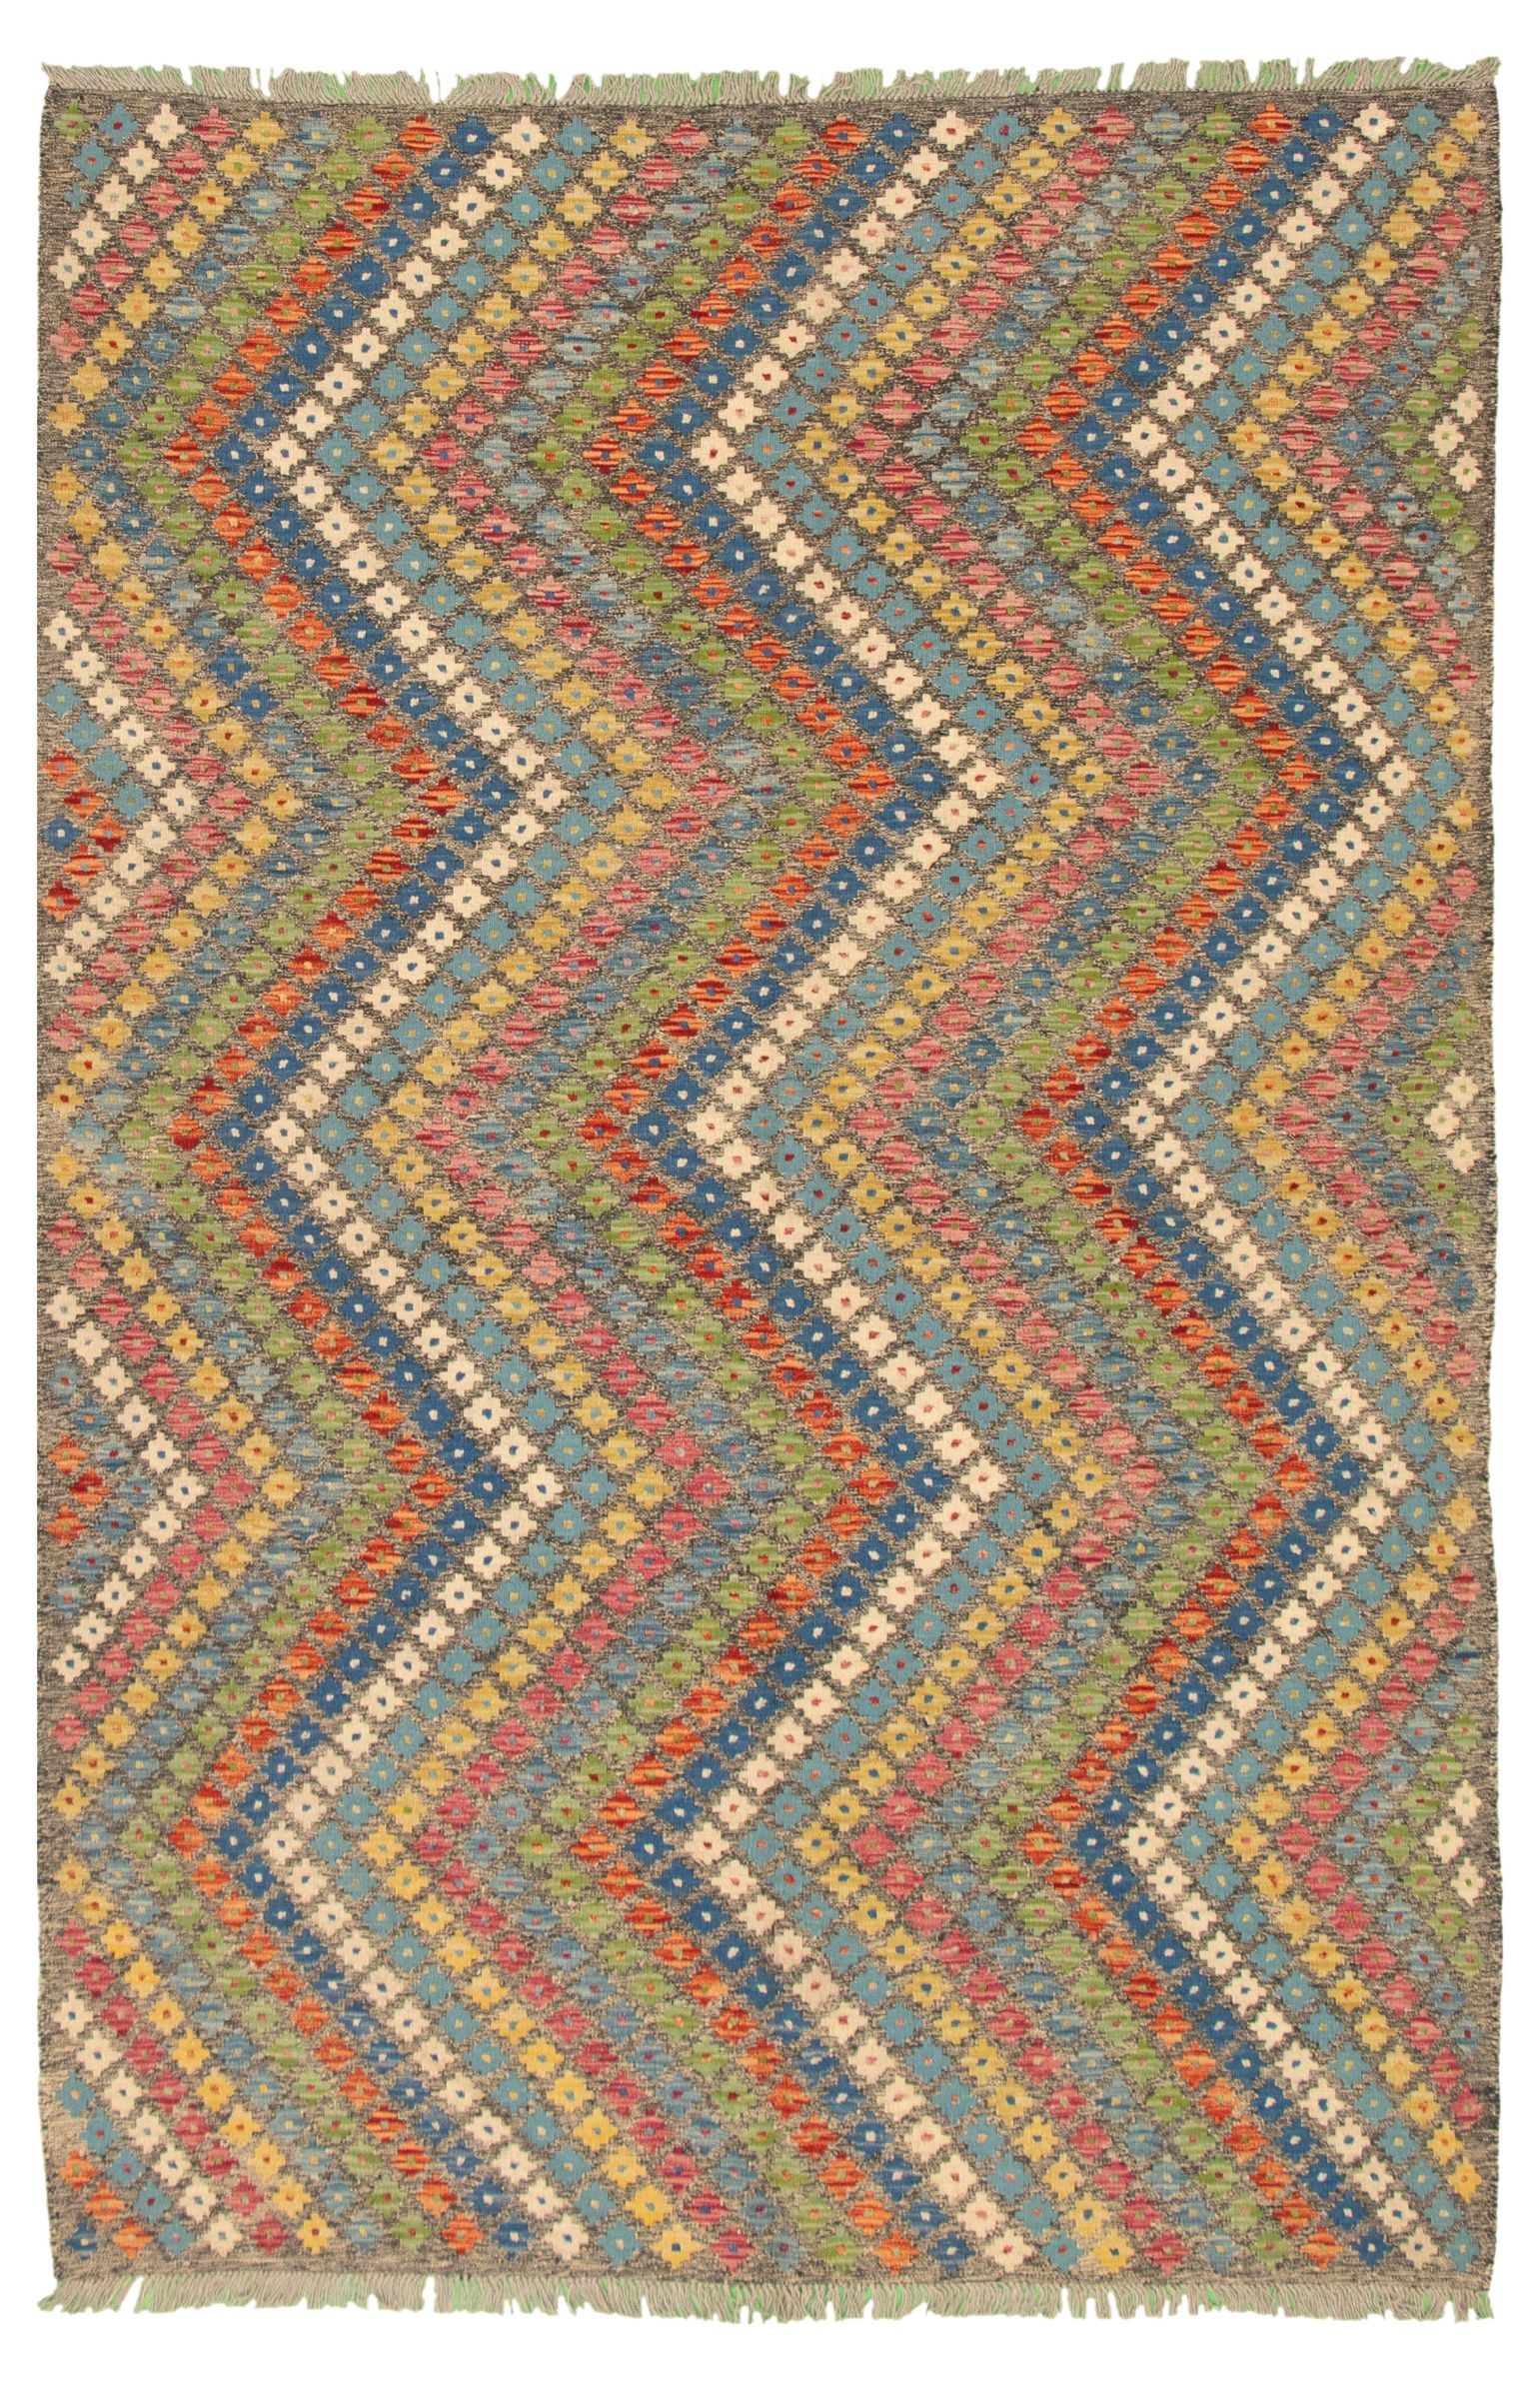 Hand woven Bold and Colorful  Dark Grey Wool Kilim 6'4" x 9'9" Size: 6'4" x 9'9"  